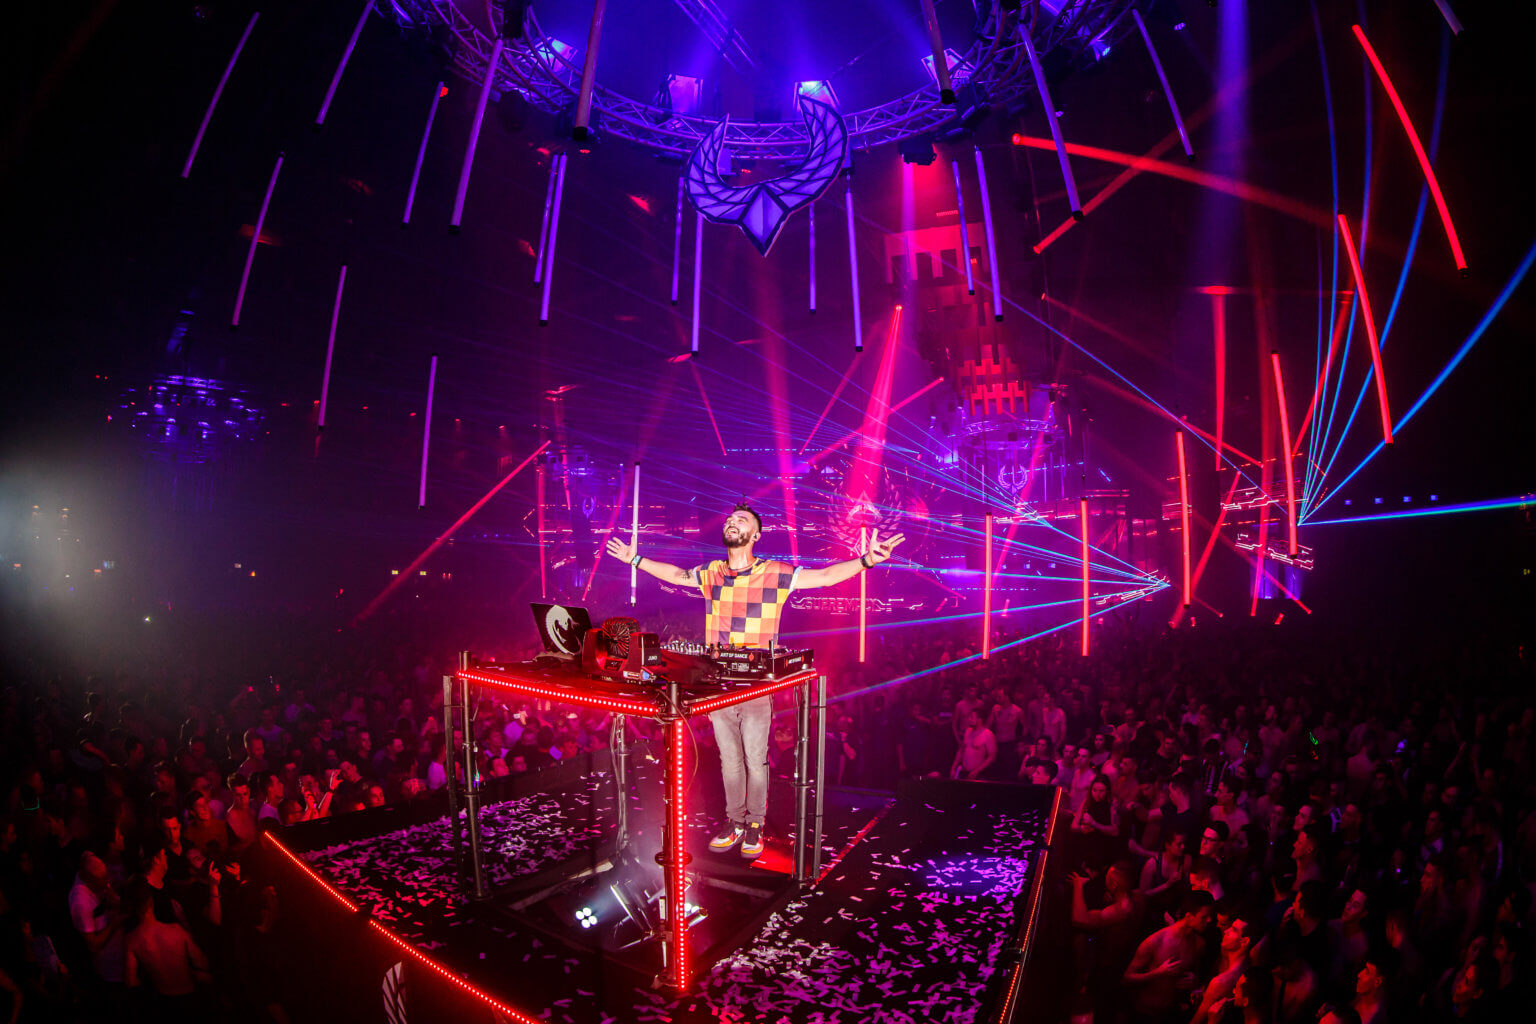 Relive the Supremacy 2019 liveset of Crypsis